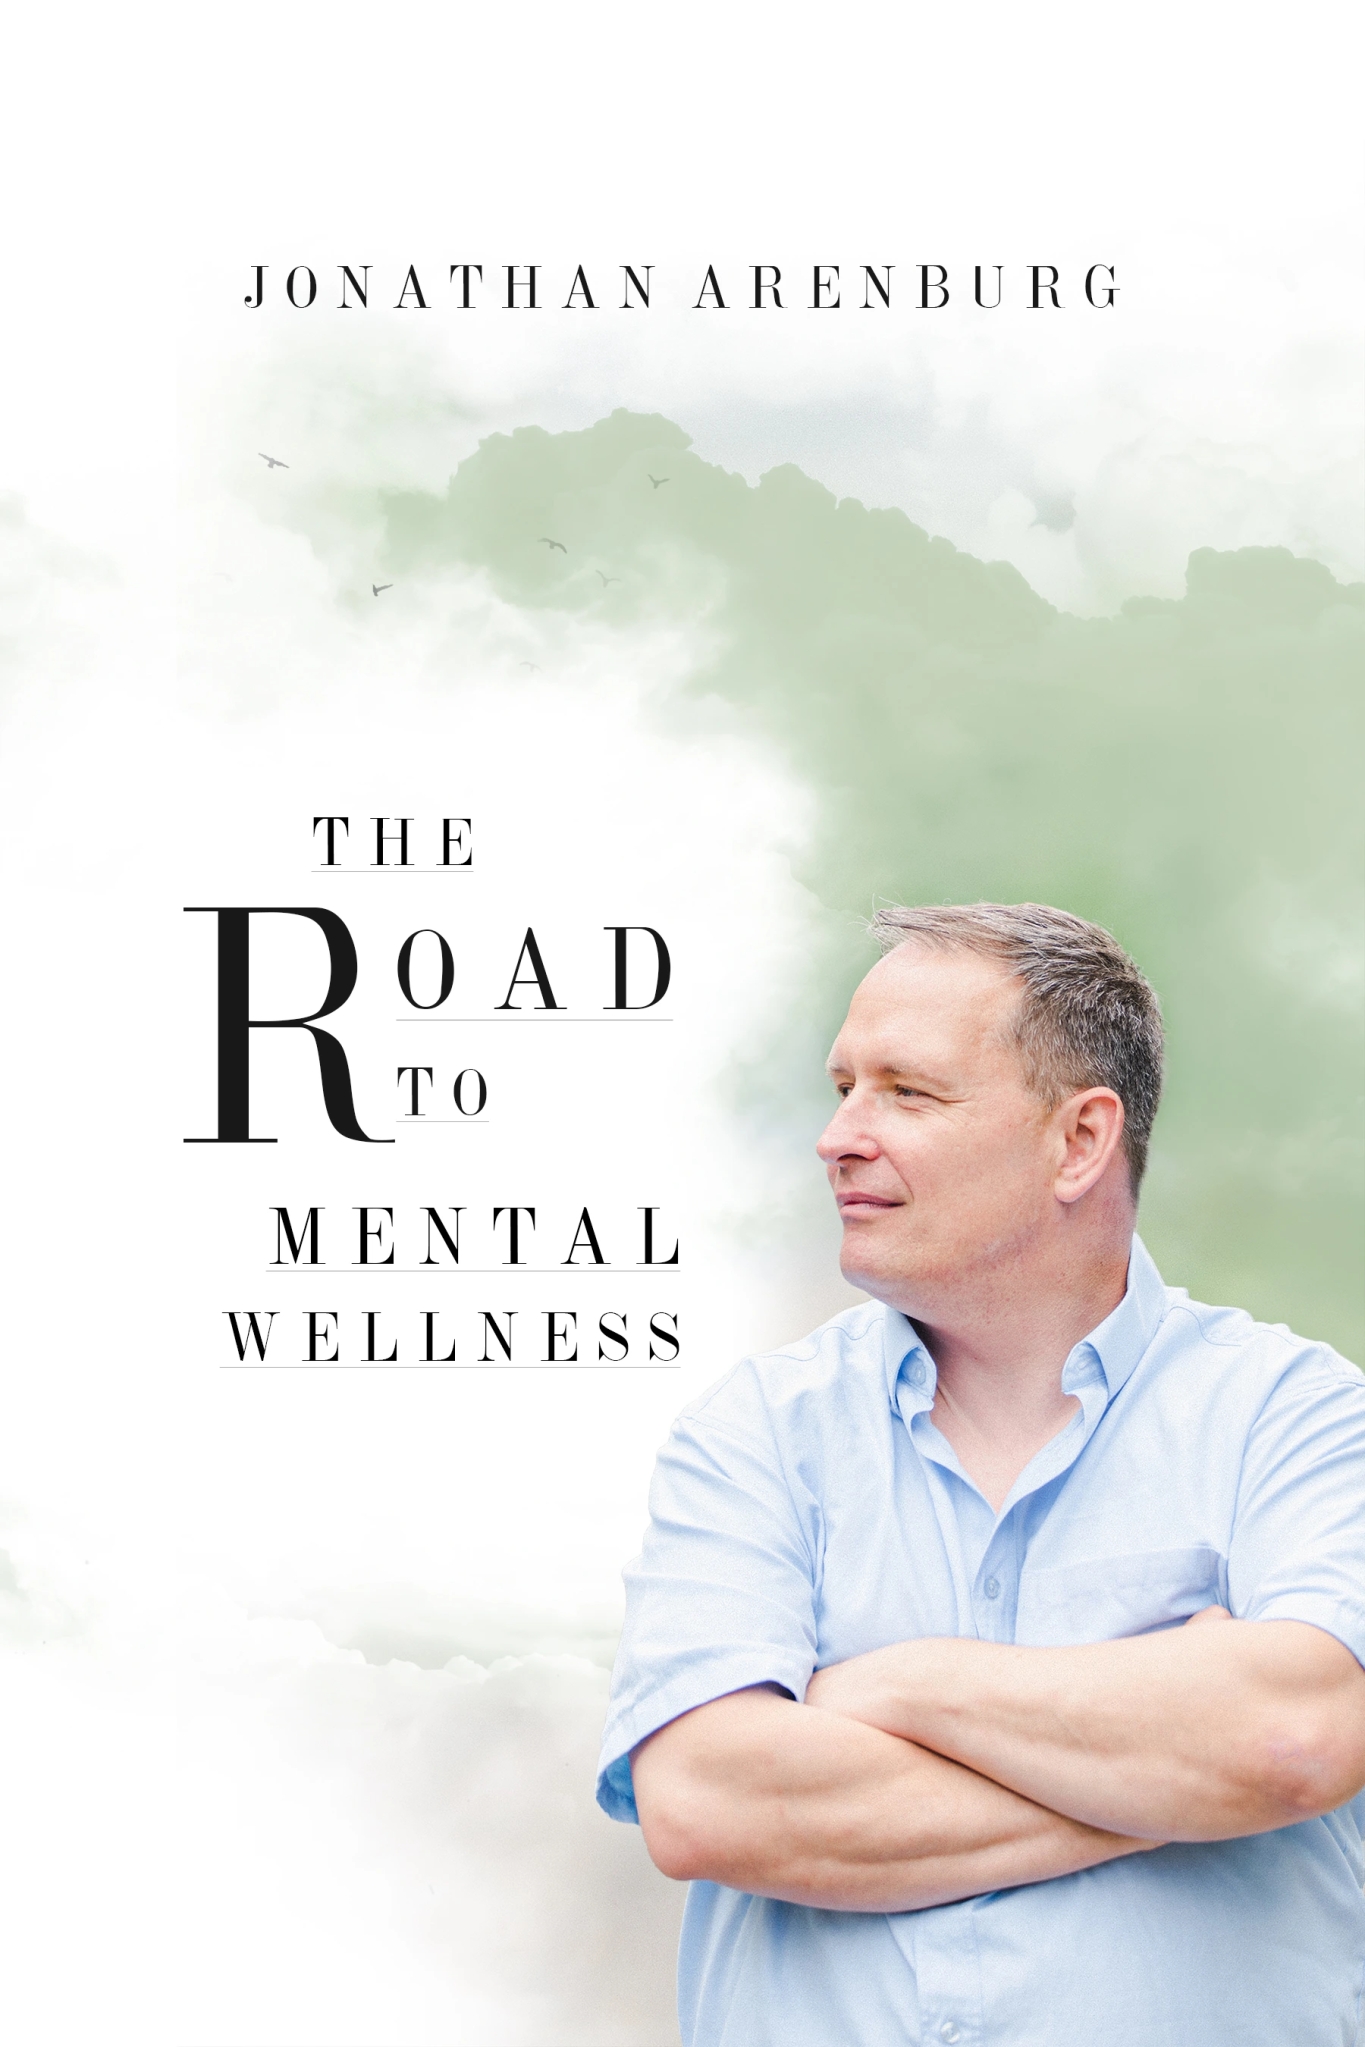 Author Jonathan Arenburg on the cover of his book, The Road To Mental Wellness